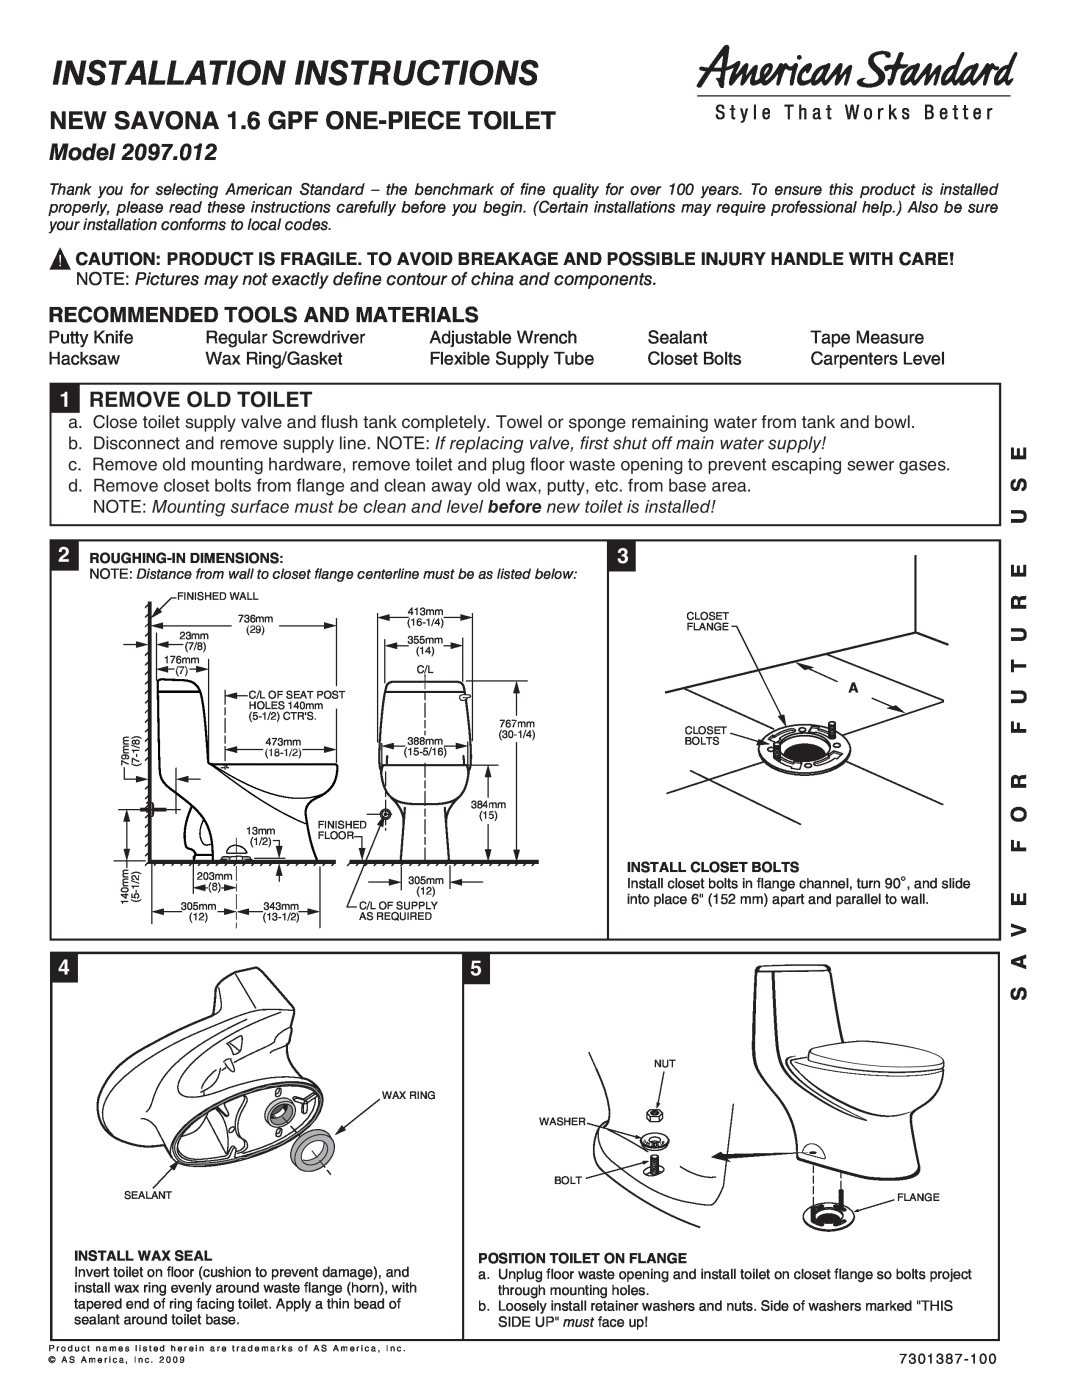 American Standard 2097.012 installation instructions NEW SAVONA 1.6 GPF ONE-PIECE TOILET, Recommended Tools And Materials 